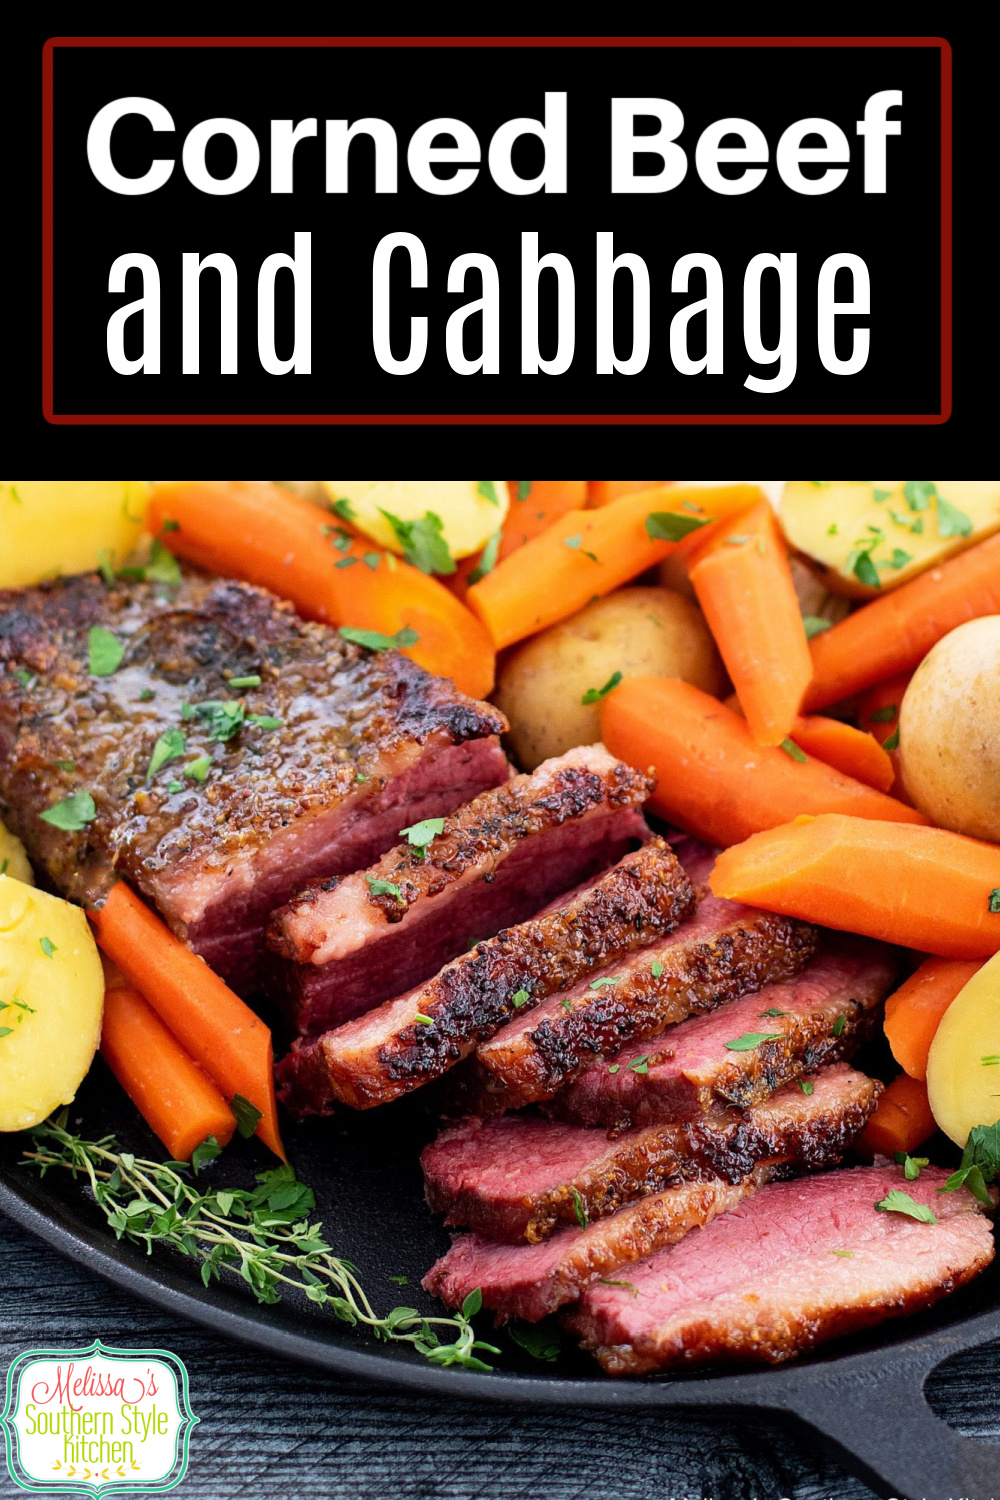 Make this mouthwatering Corned Beef and Cabbage with carrots and potatoes to complete your St Patrick's Day meal #cornedbeef #cornedbeefandcabbage #StPatricksDay #beef #beefbrisket #southernrecipes #cabbage #cornedbeefandcabbage via @melissasssk